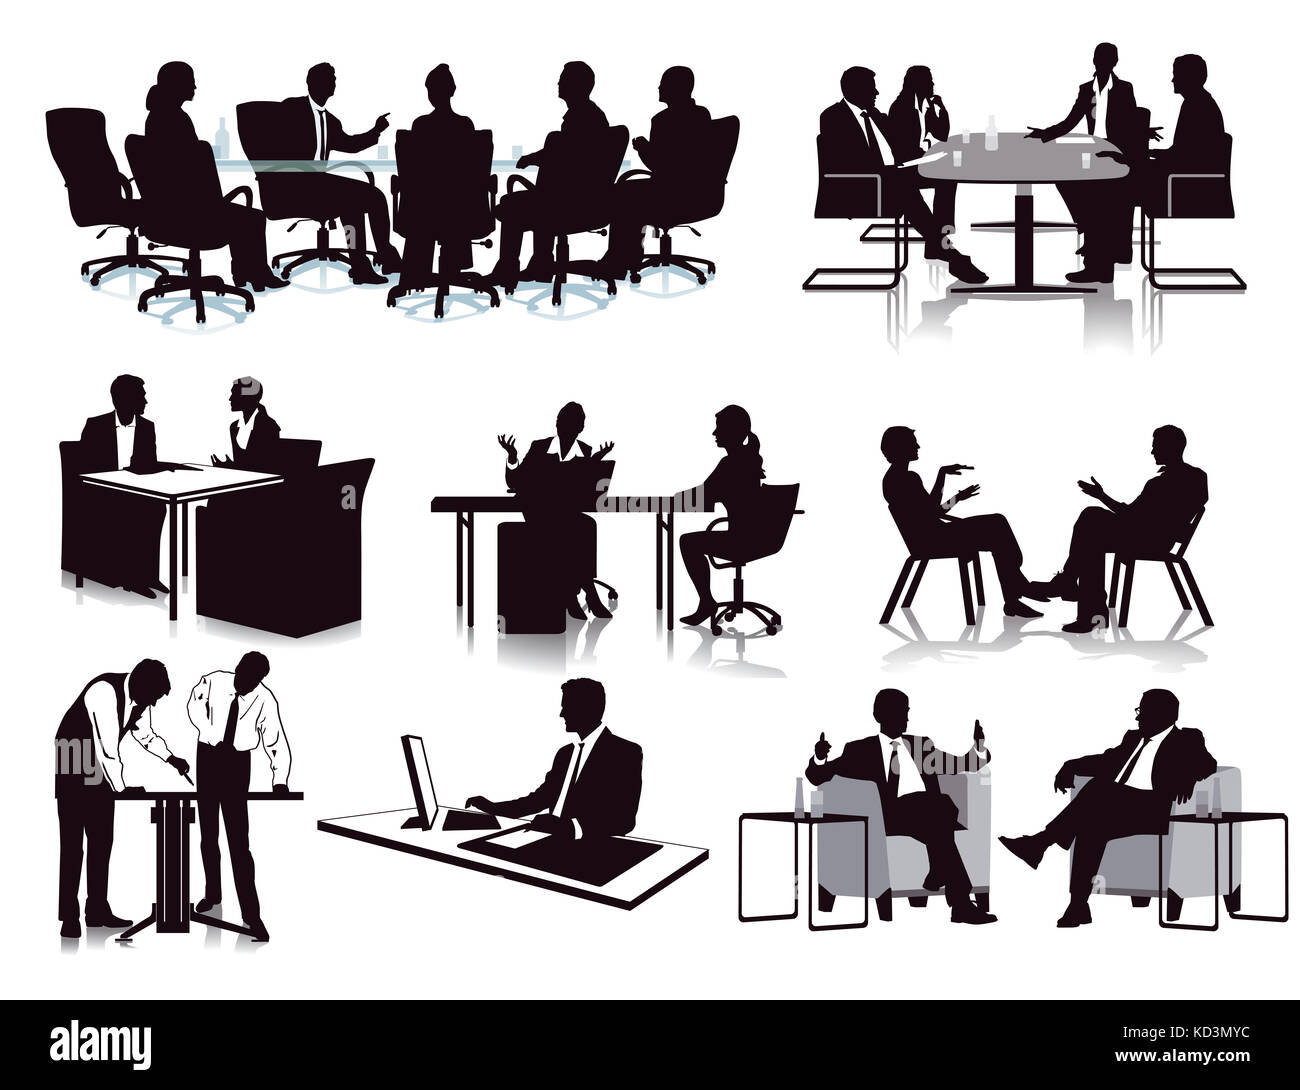 Business meeting discussion, illustration Stock Photo